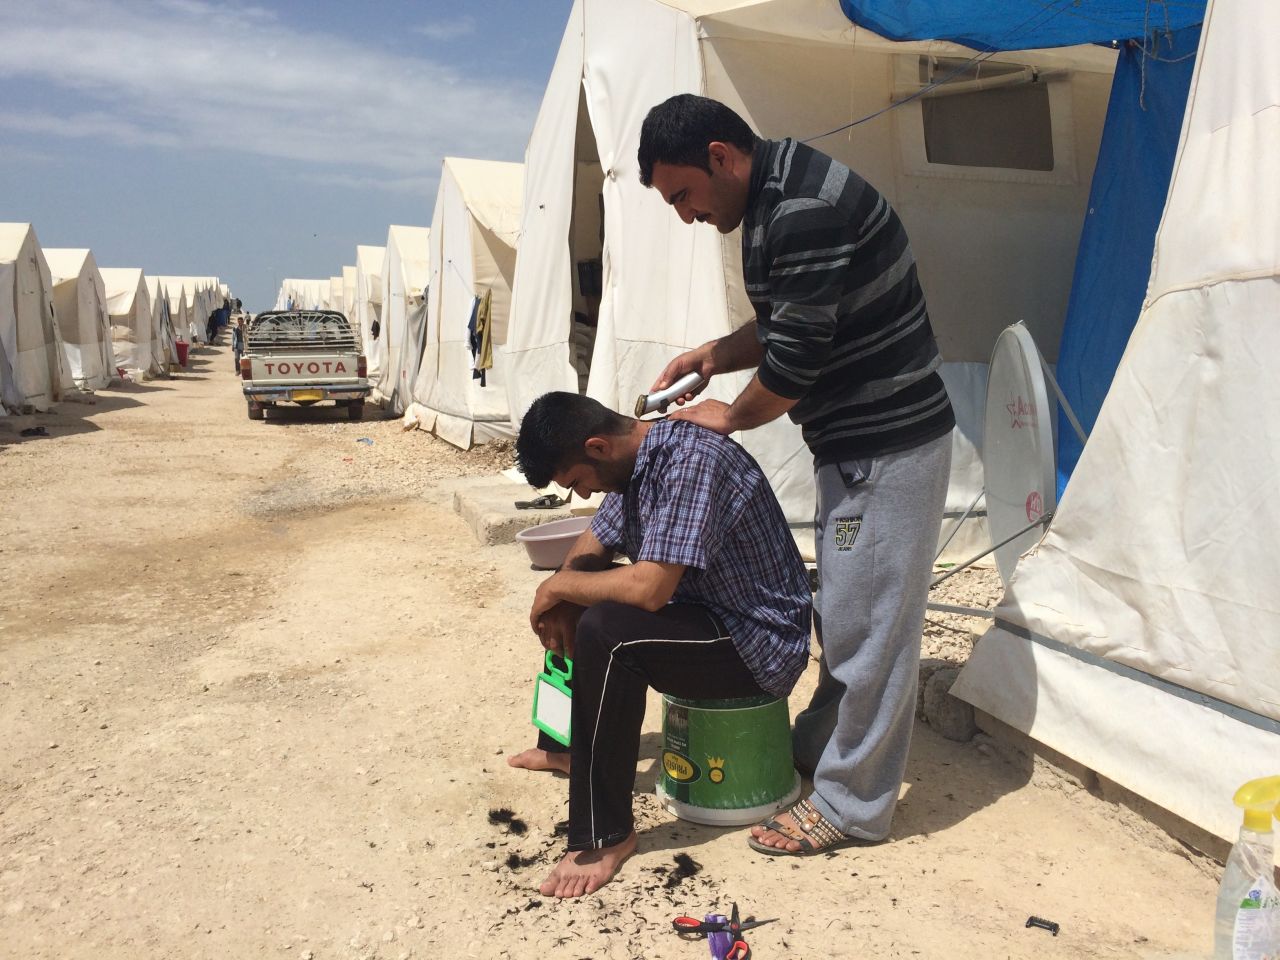 A man gives another a shave. For many, an element of normalcy has returned after months in the camp. 